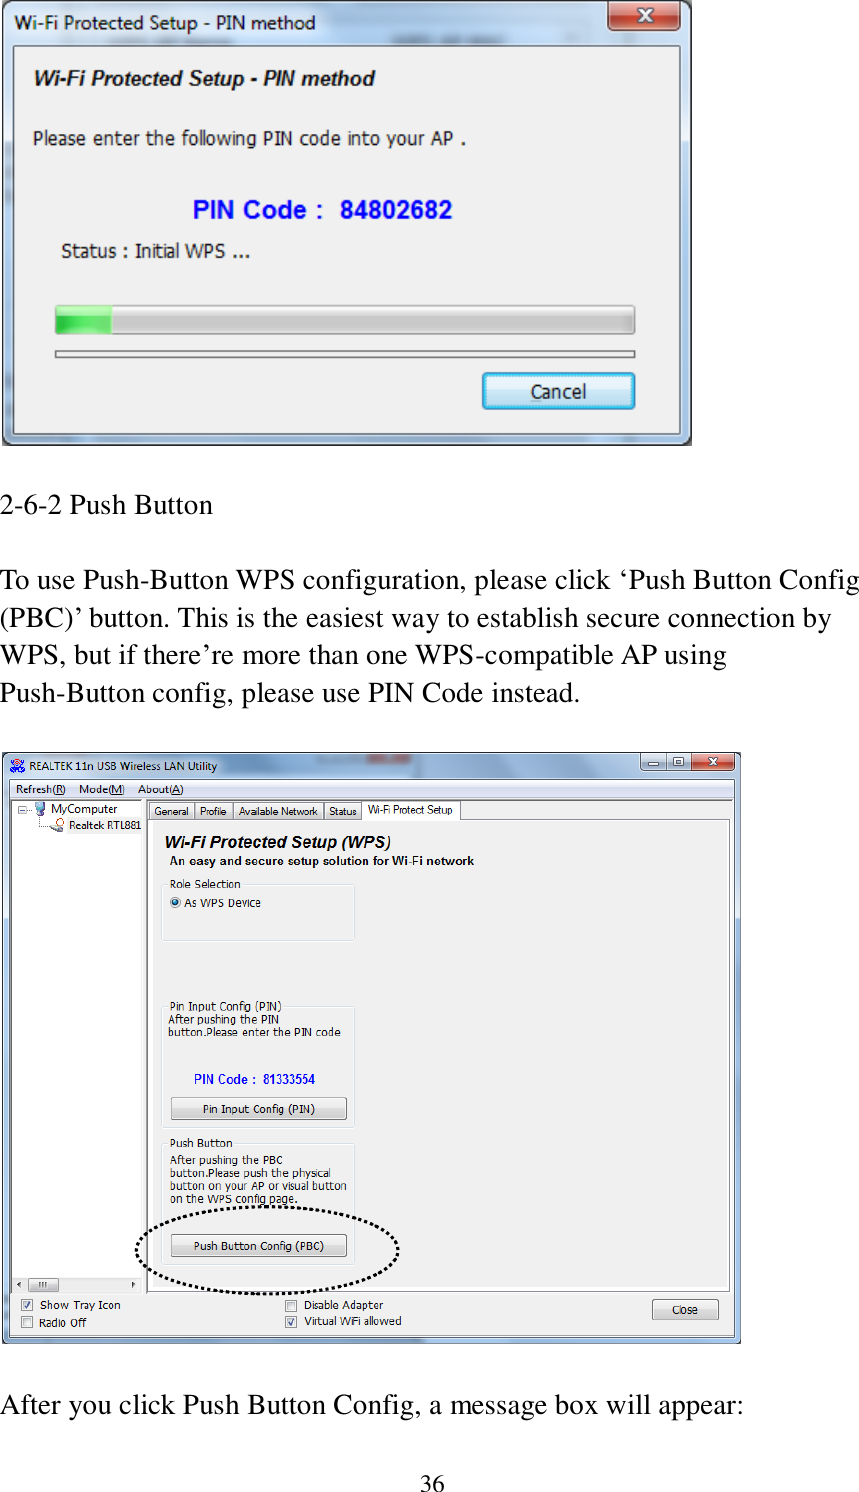  36     2-6-2 Push Button  To use Push-Button WPS configuration, please click ‘Push Button Config (PBC)’ button. This is the easiest way to establish secure connection by WPS, but if there’re more than one WPS-compatible AP using Push-Button config, please use PIN Code instead.    After you click Push Button Config, a message box will appear: 